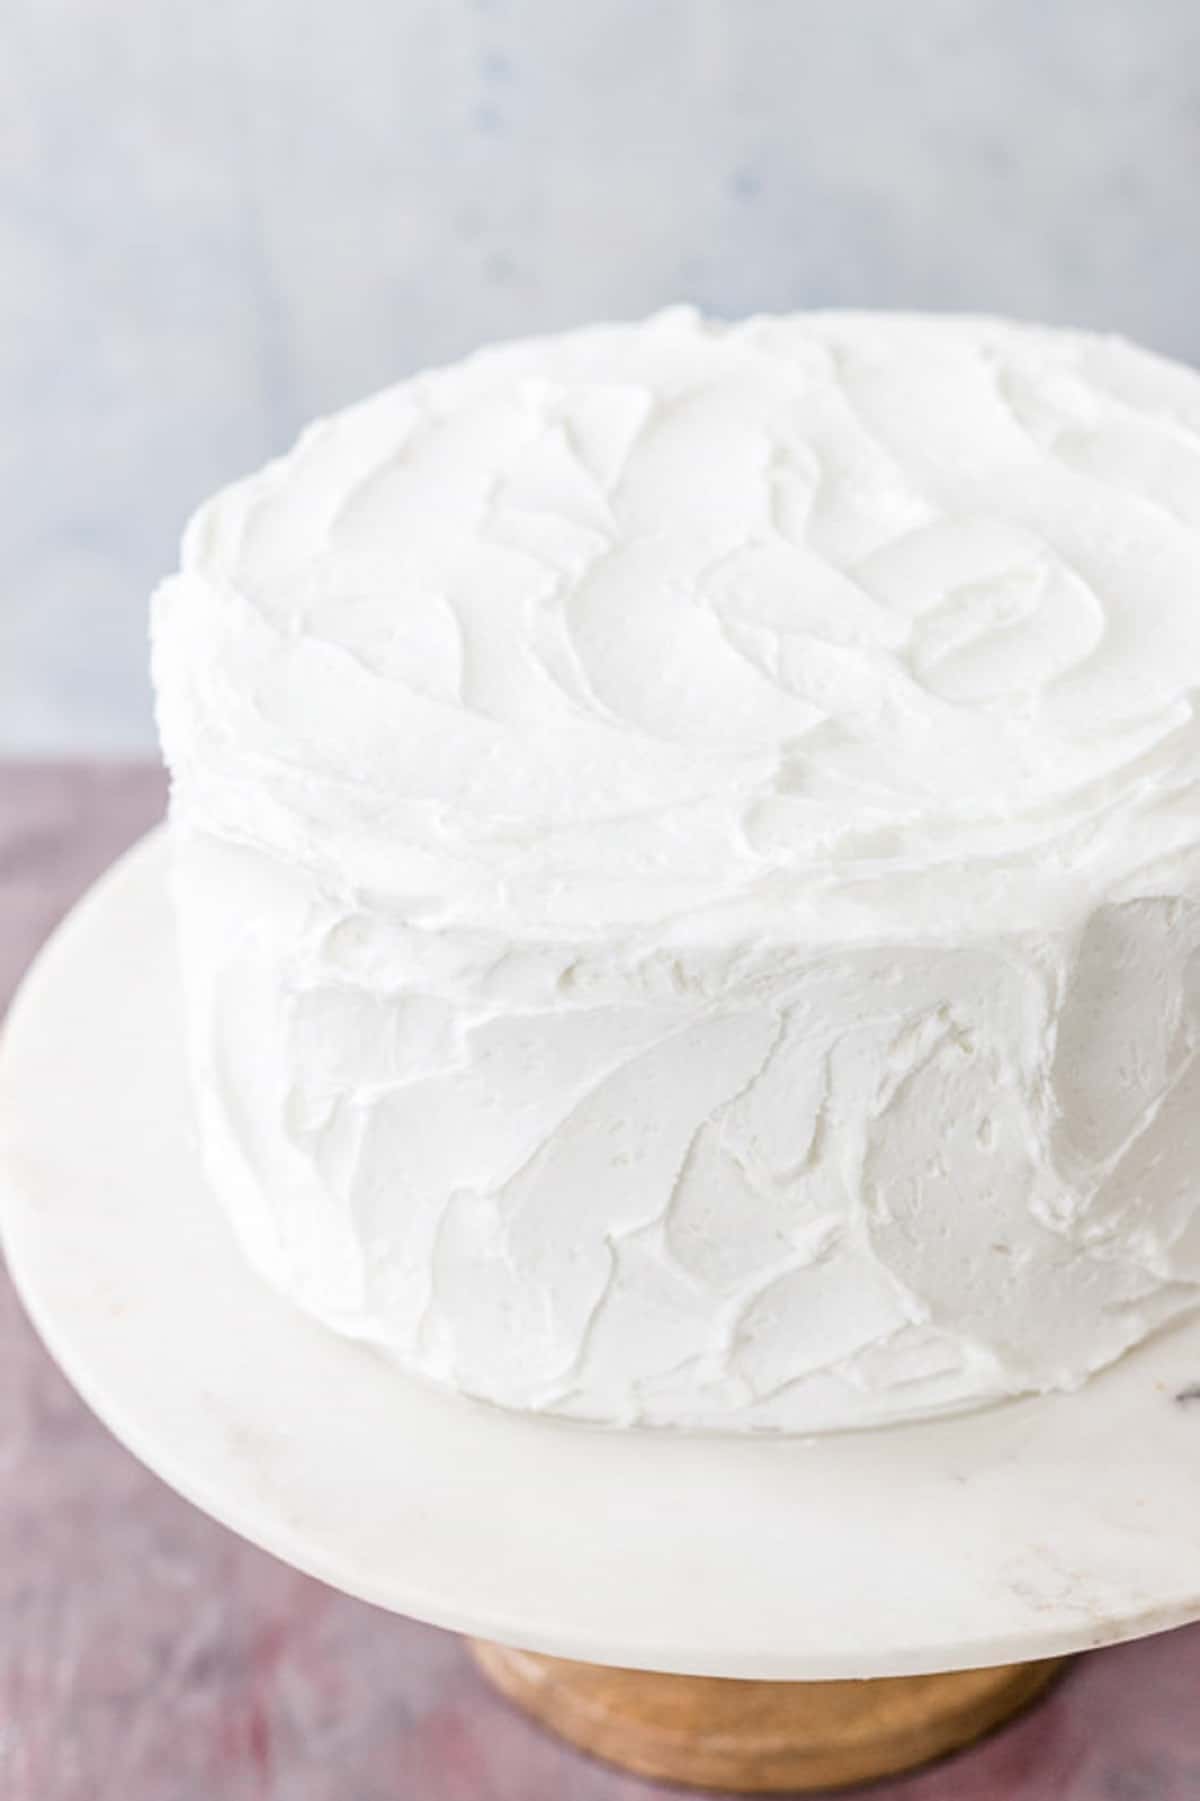 White icing on a layer cake.